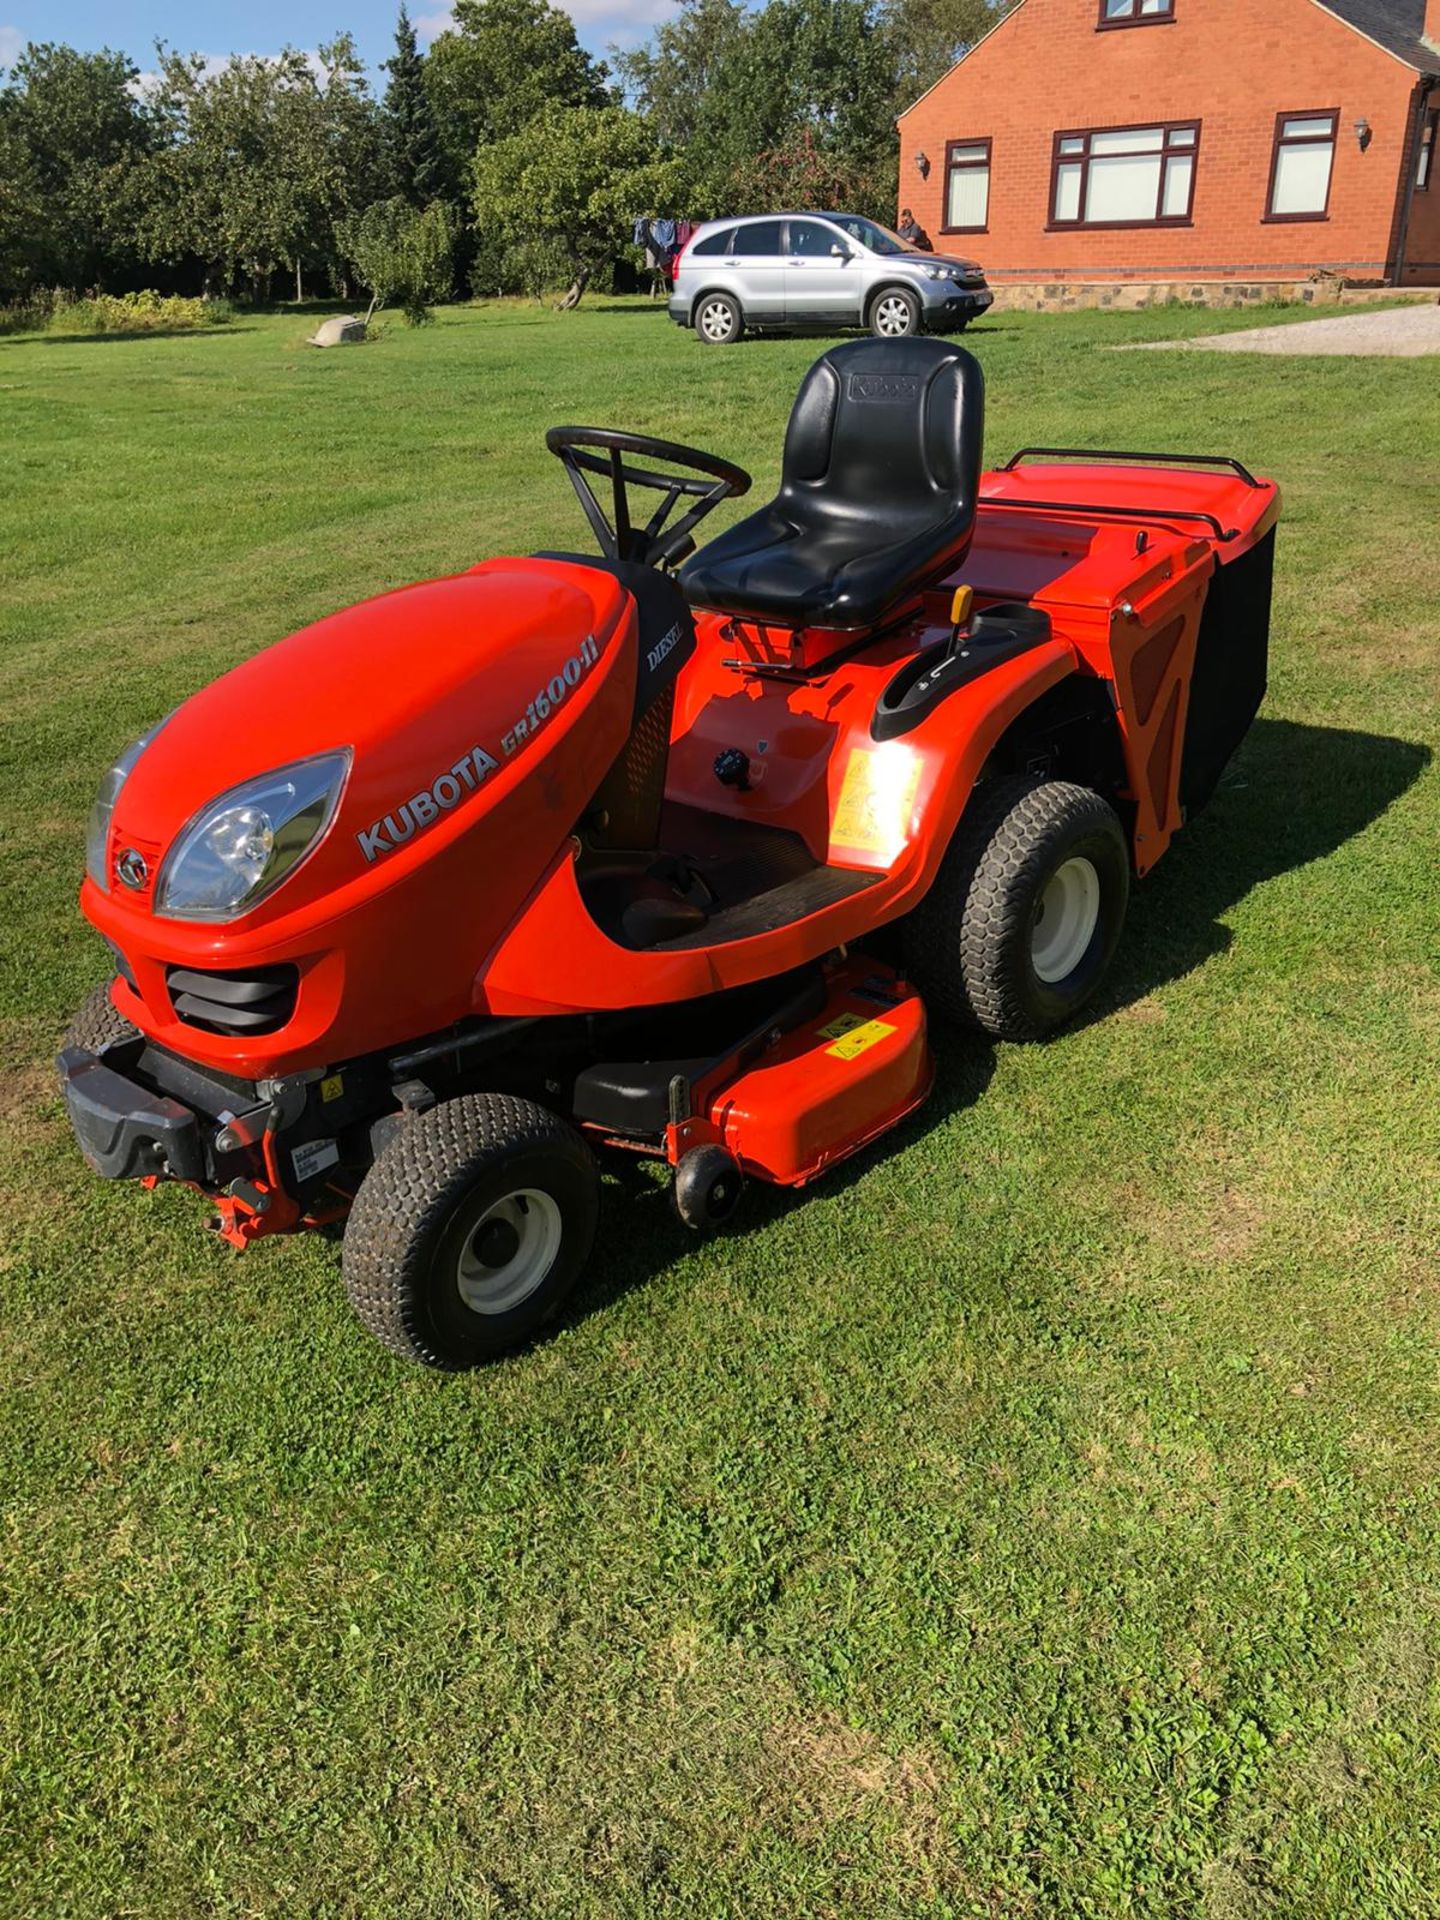 KUBOTA GR1600-II DIESEL RIDE ON LAWN MOWER, RUNS, DRIVES AND CUTS, EX DEMO CONDITION, ONLY 66 HOURS! - Image 2 of 4